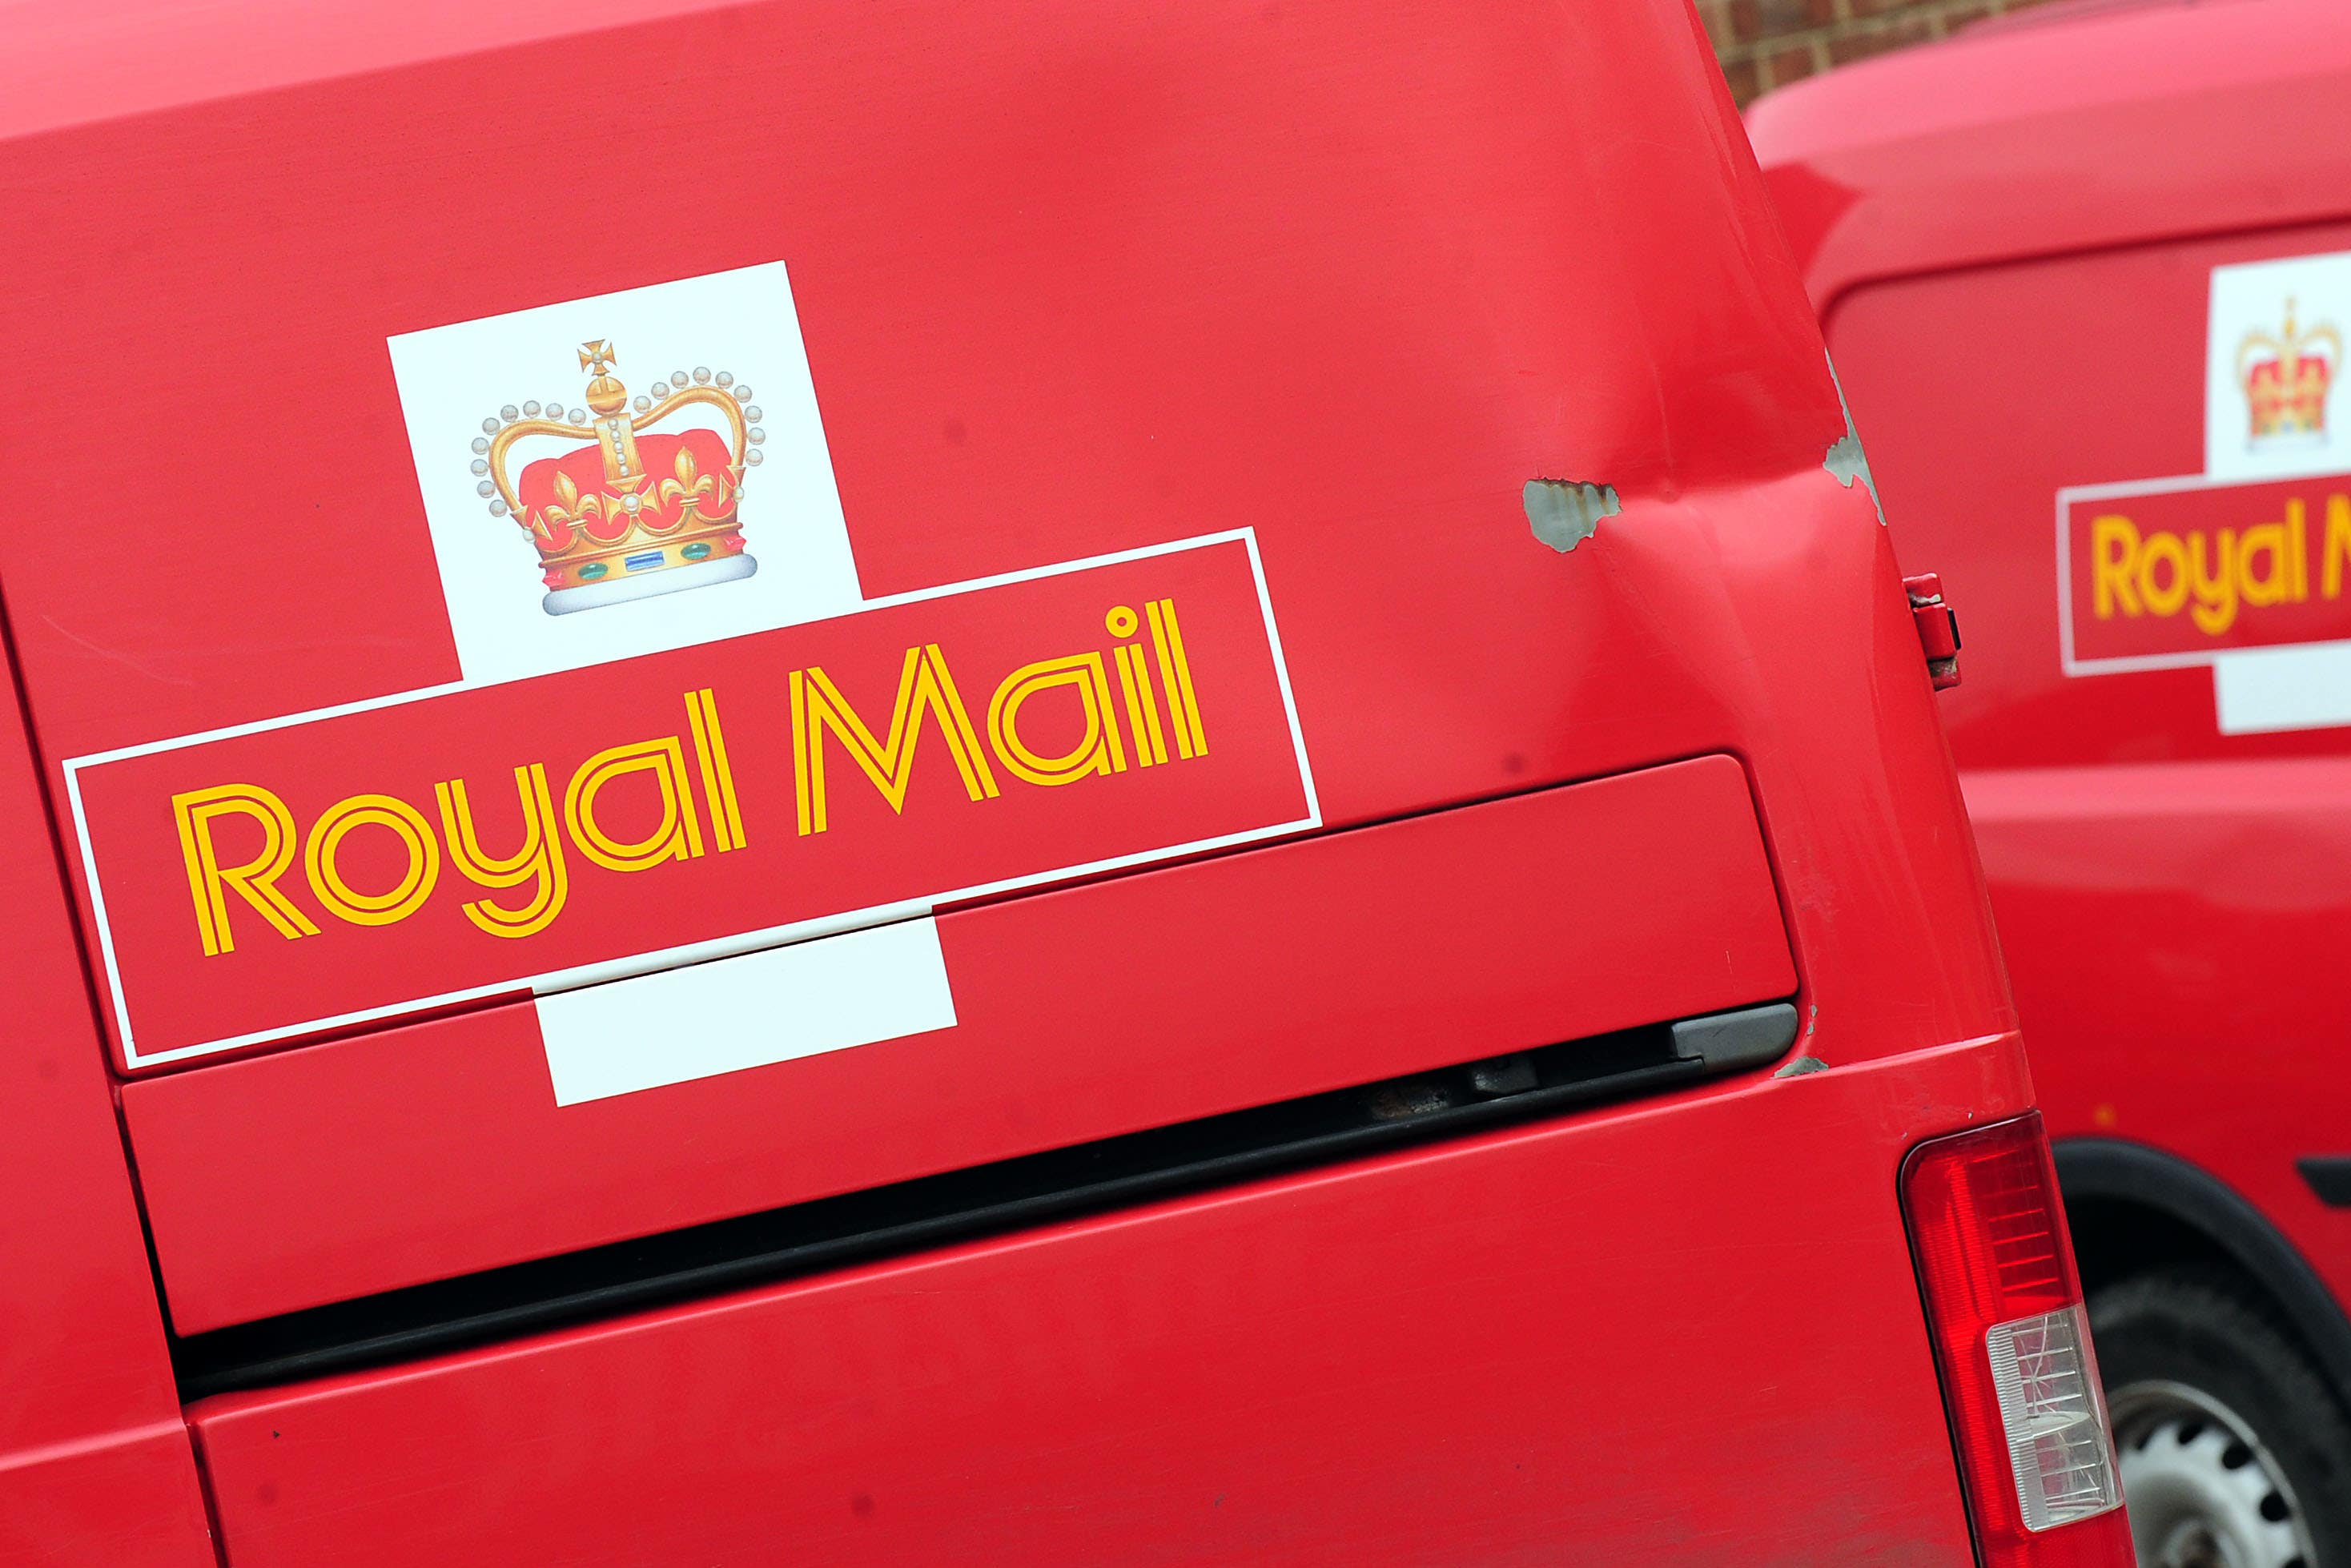 It is alleged that the group defrauded Royal Mail of ?70 million (Rui Vieira/PA)